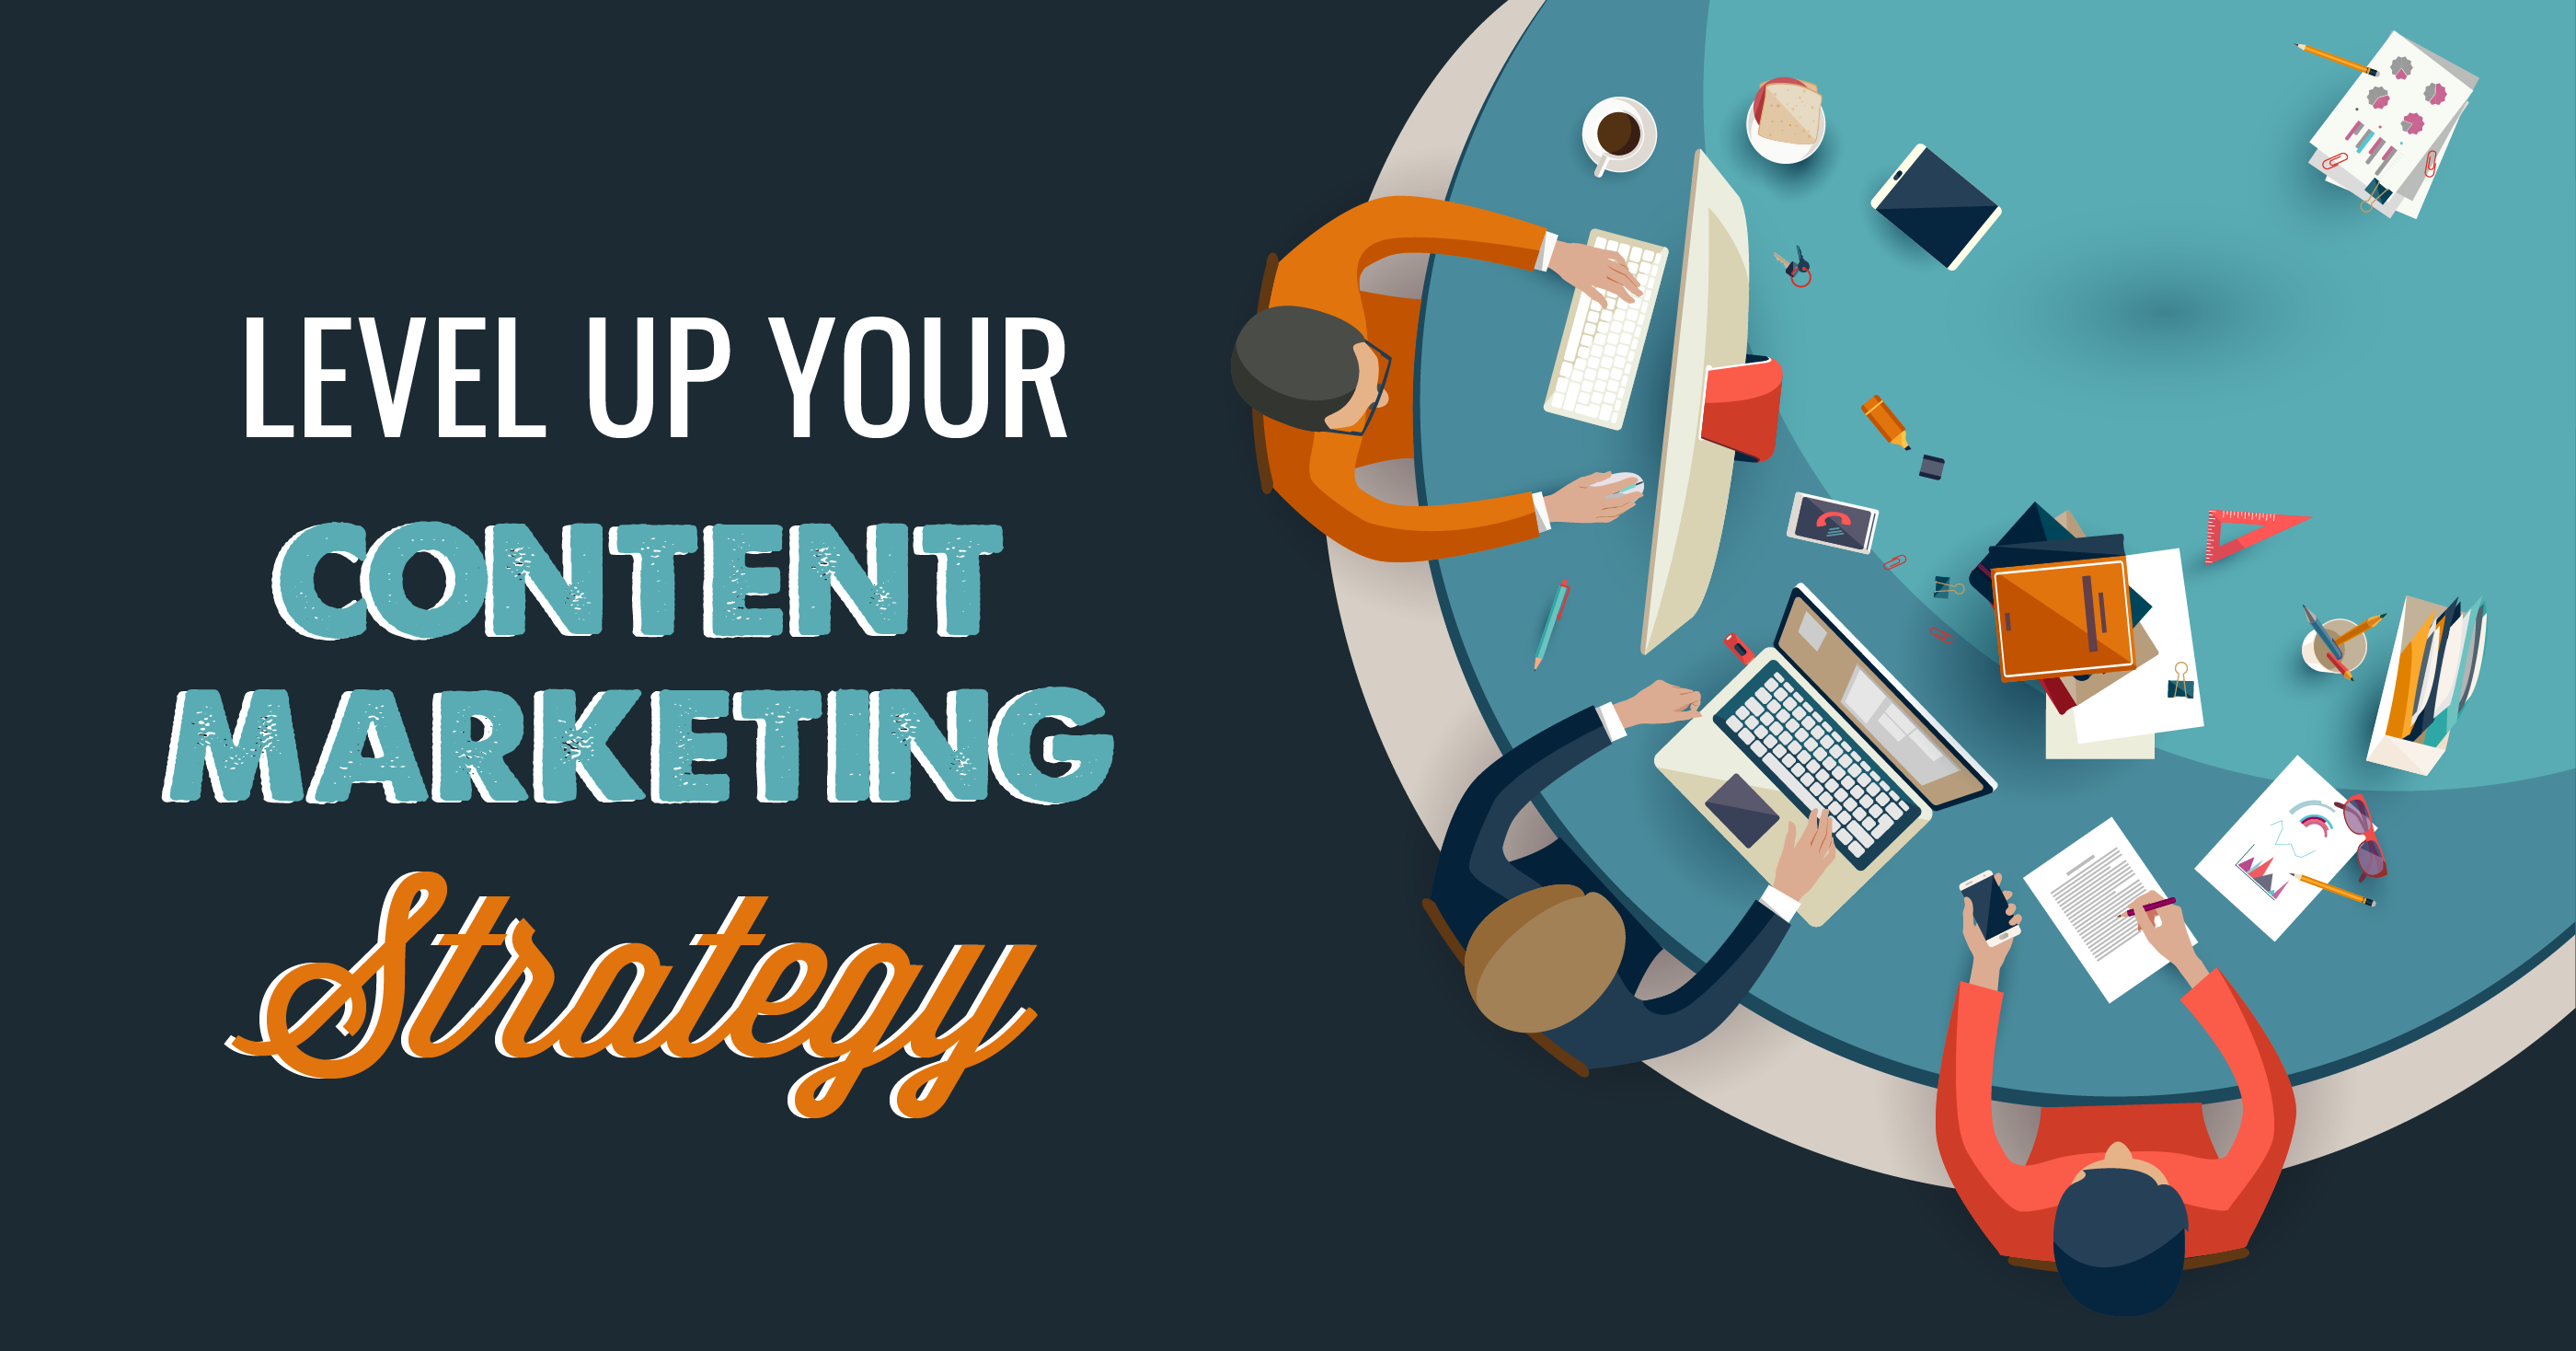 Level Up Your Content Marketing Strategy